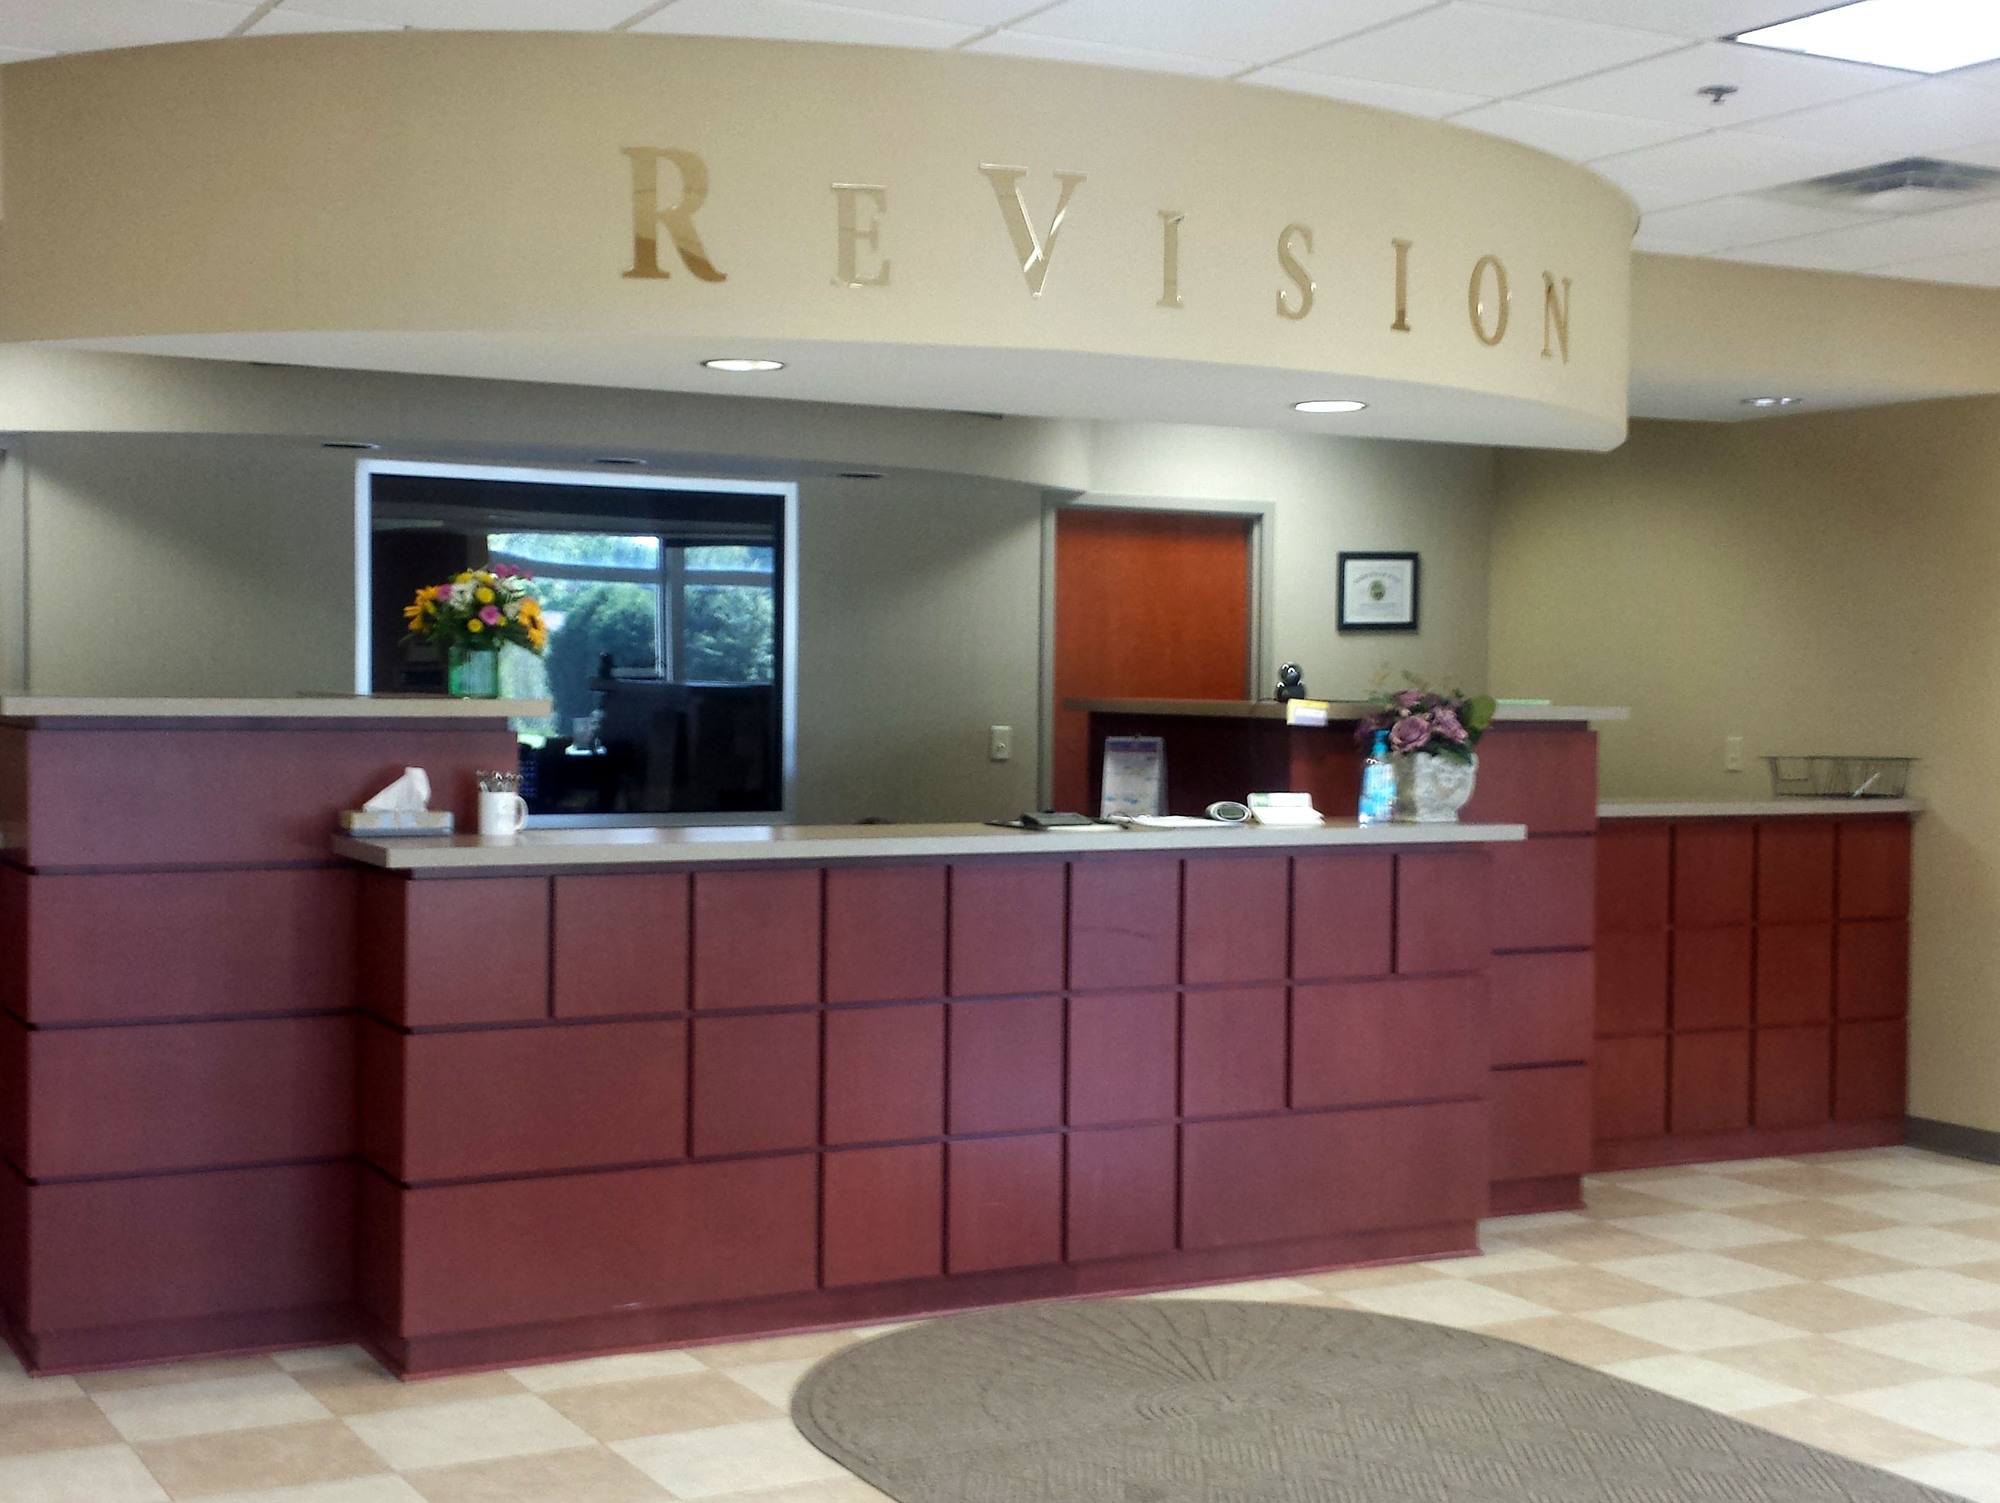 ReVision_Mansfield_FrontDesk